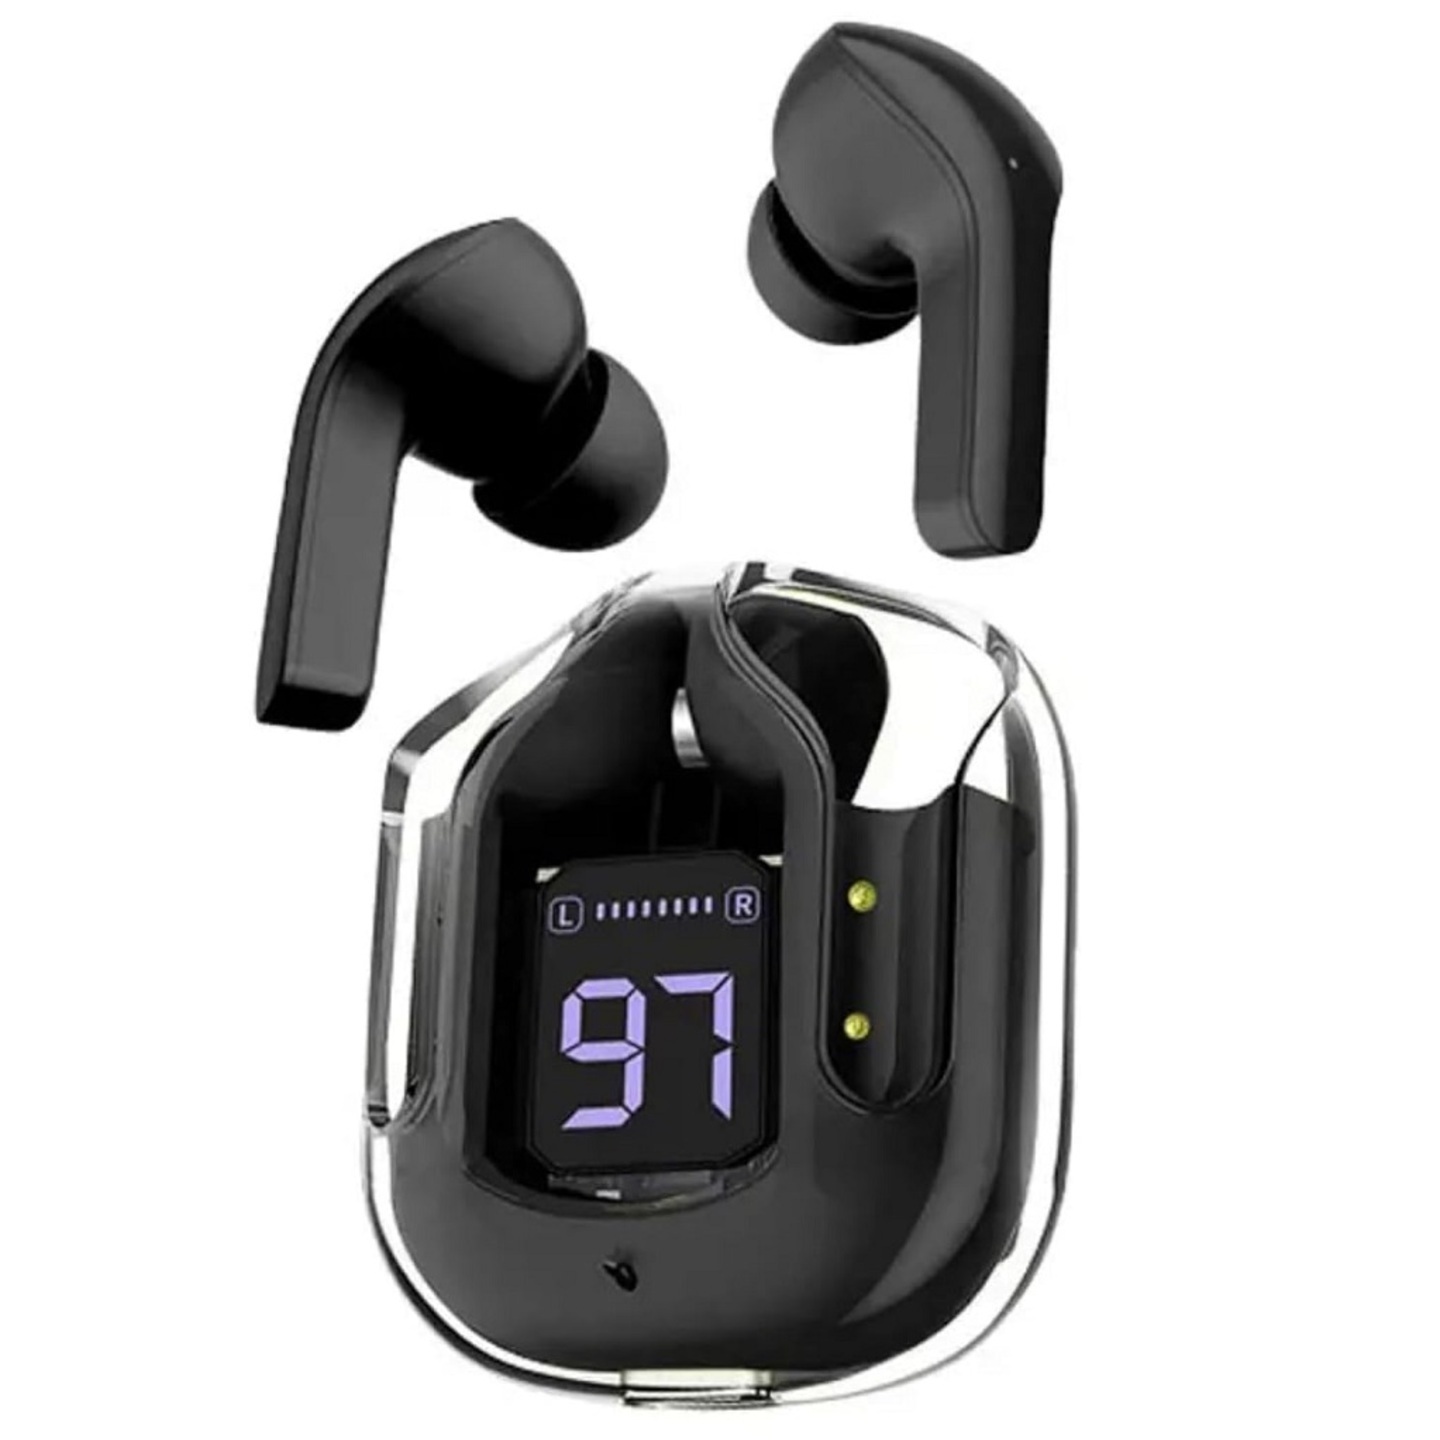 Ultrapods max TWS Bluetooth Earbuds with Charging Case, Digital Display, Microphone (Works with iPhone & Android)